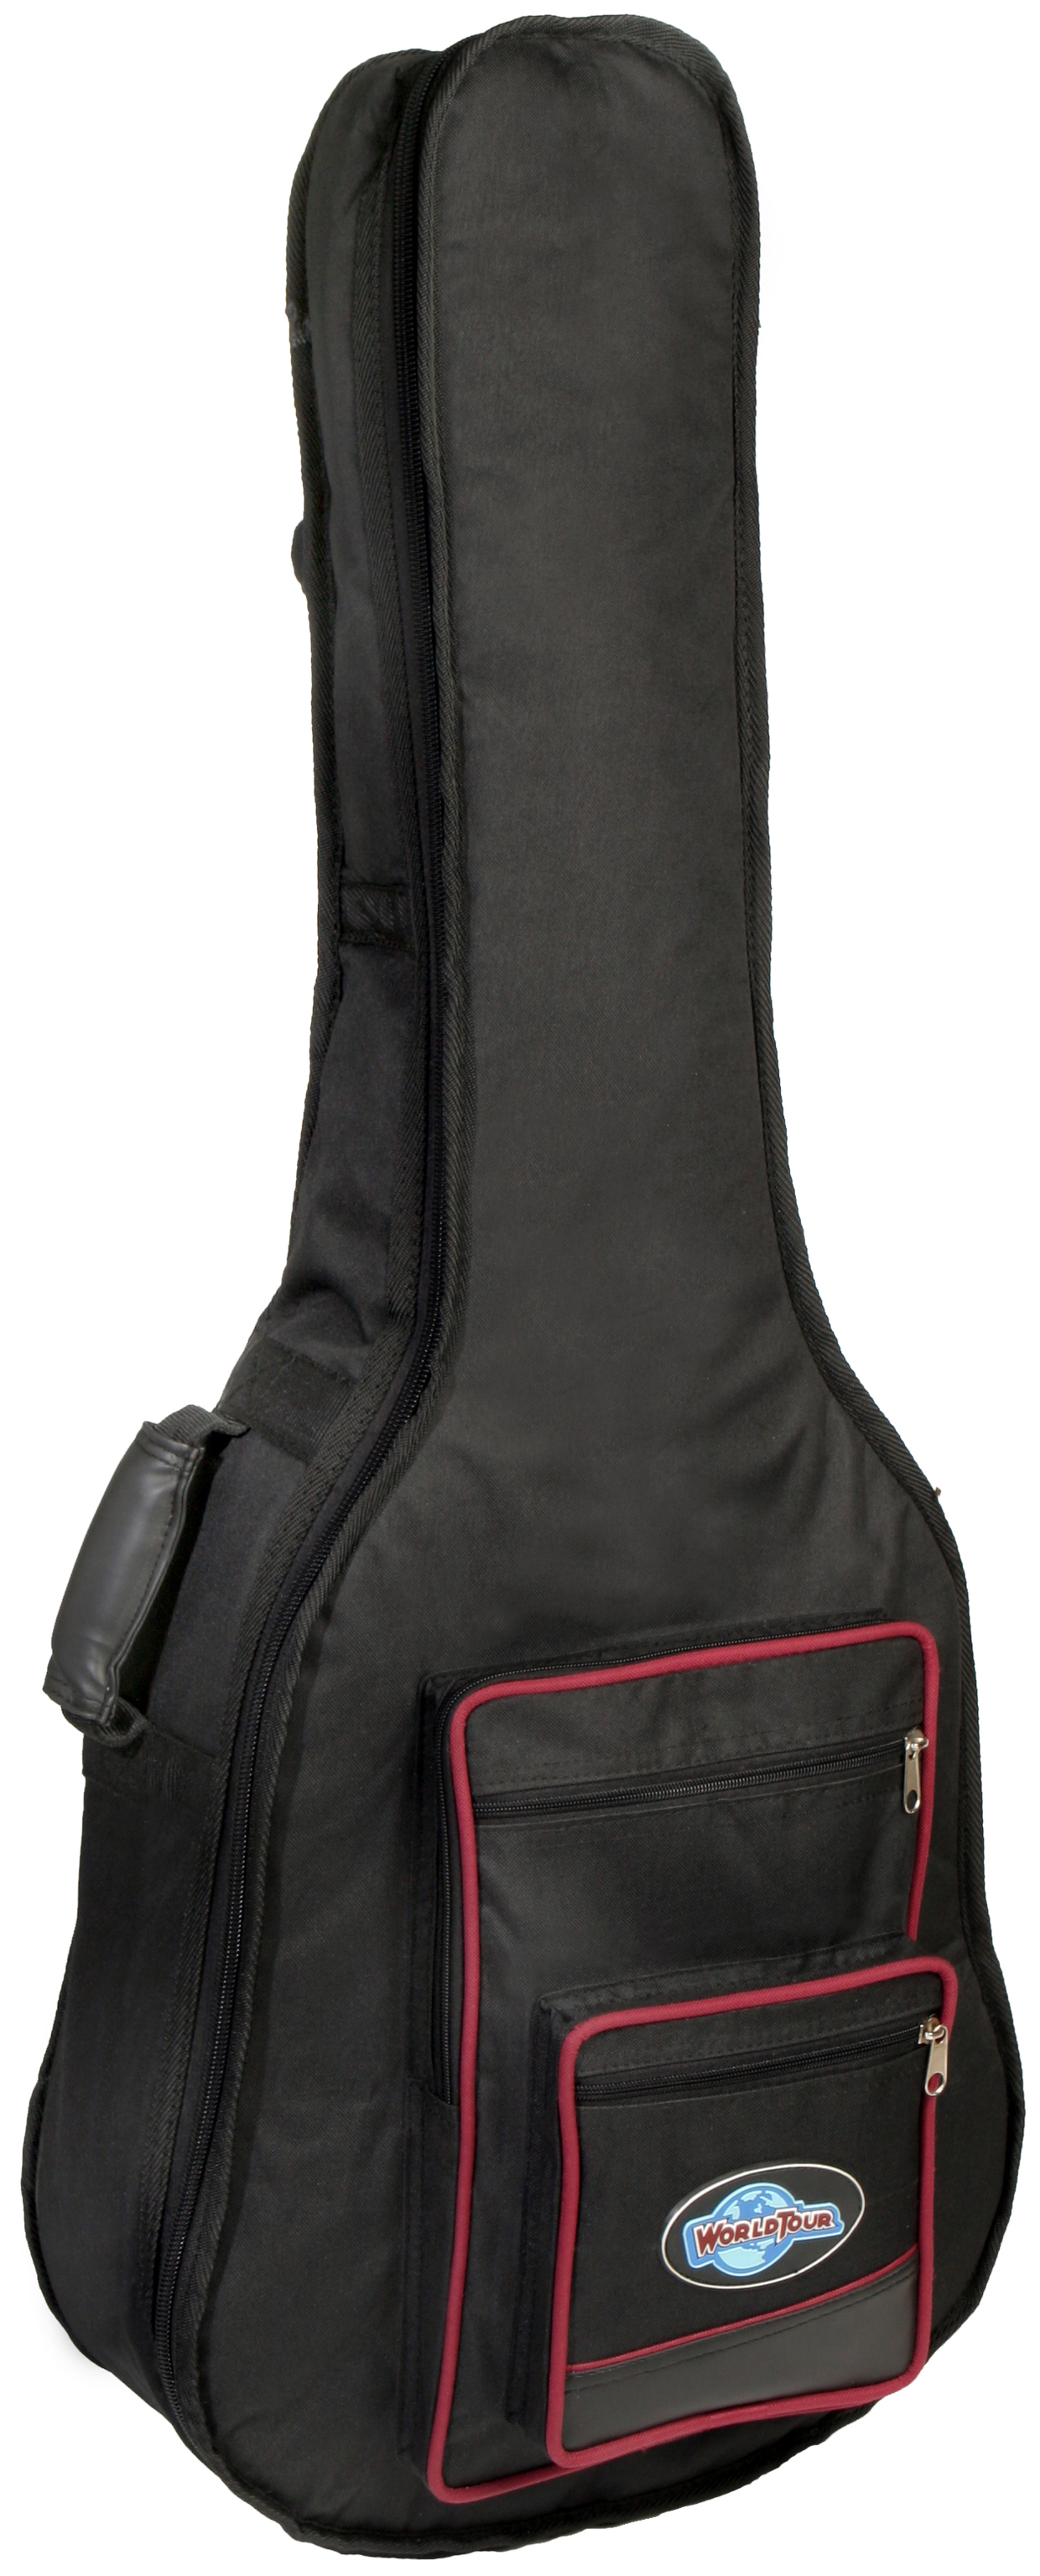 World Tour World Tour Deluxe Acoustic Bass Gig Bag